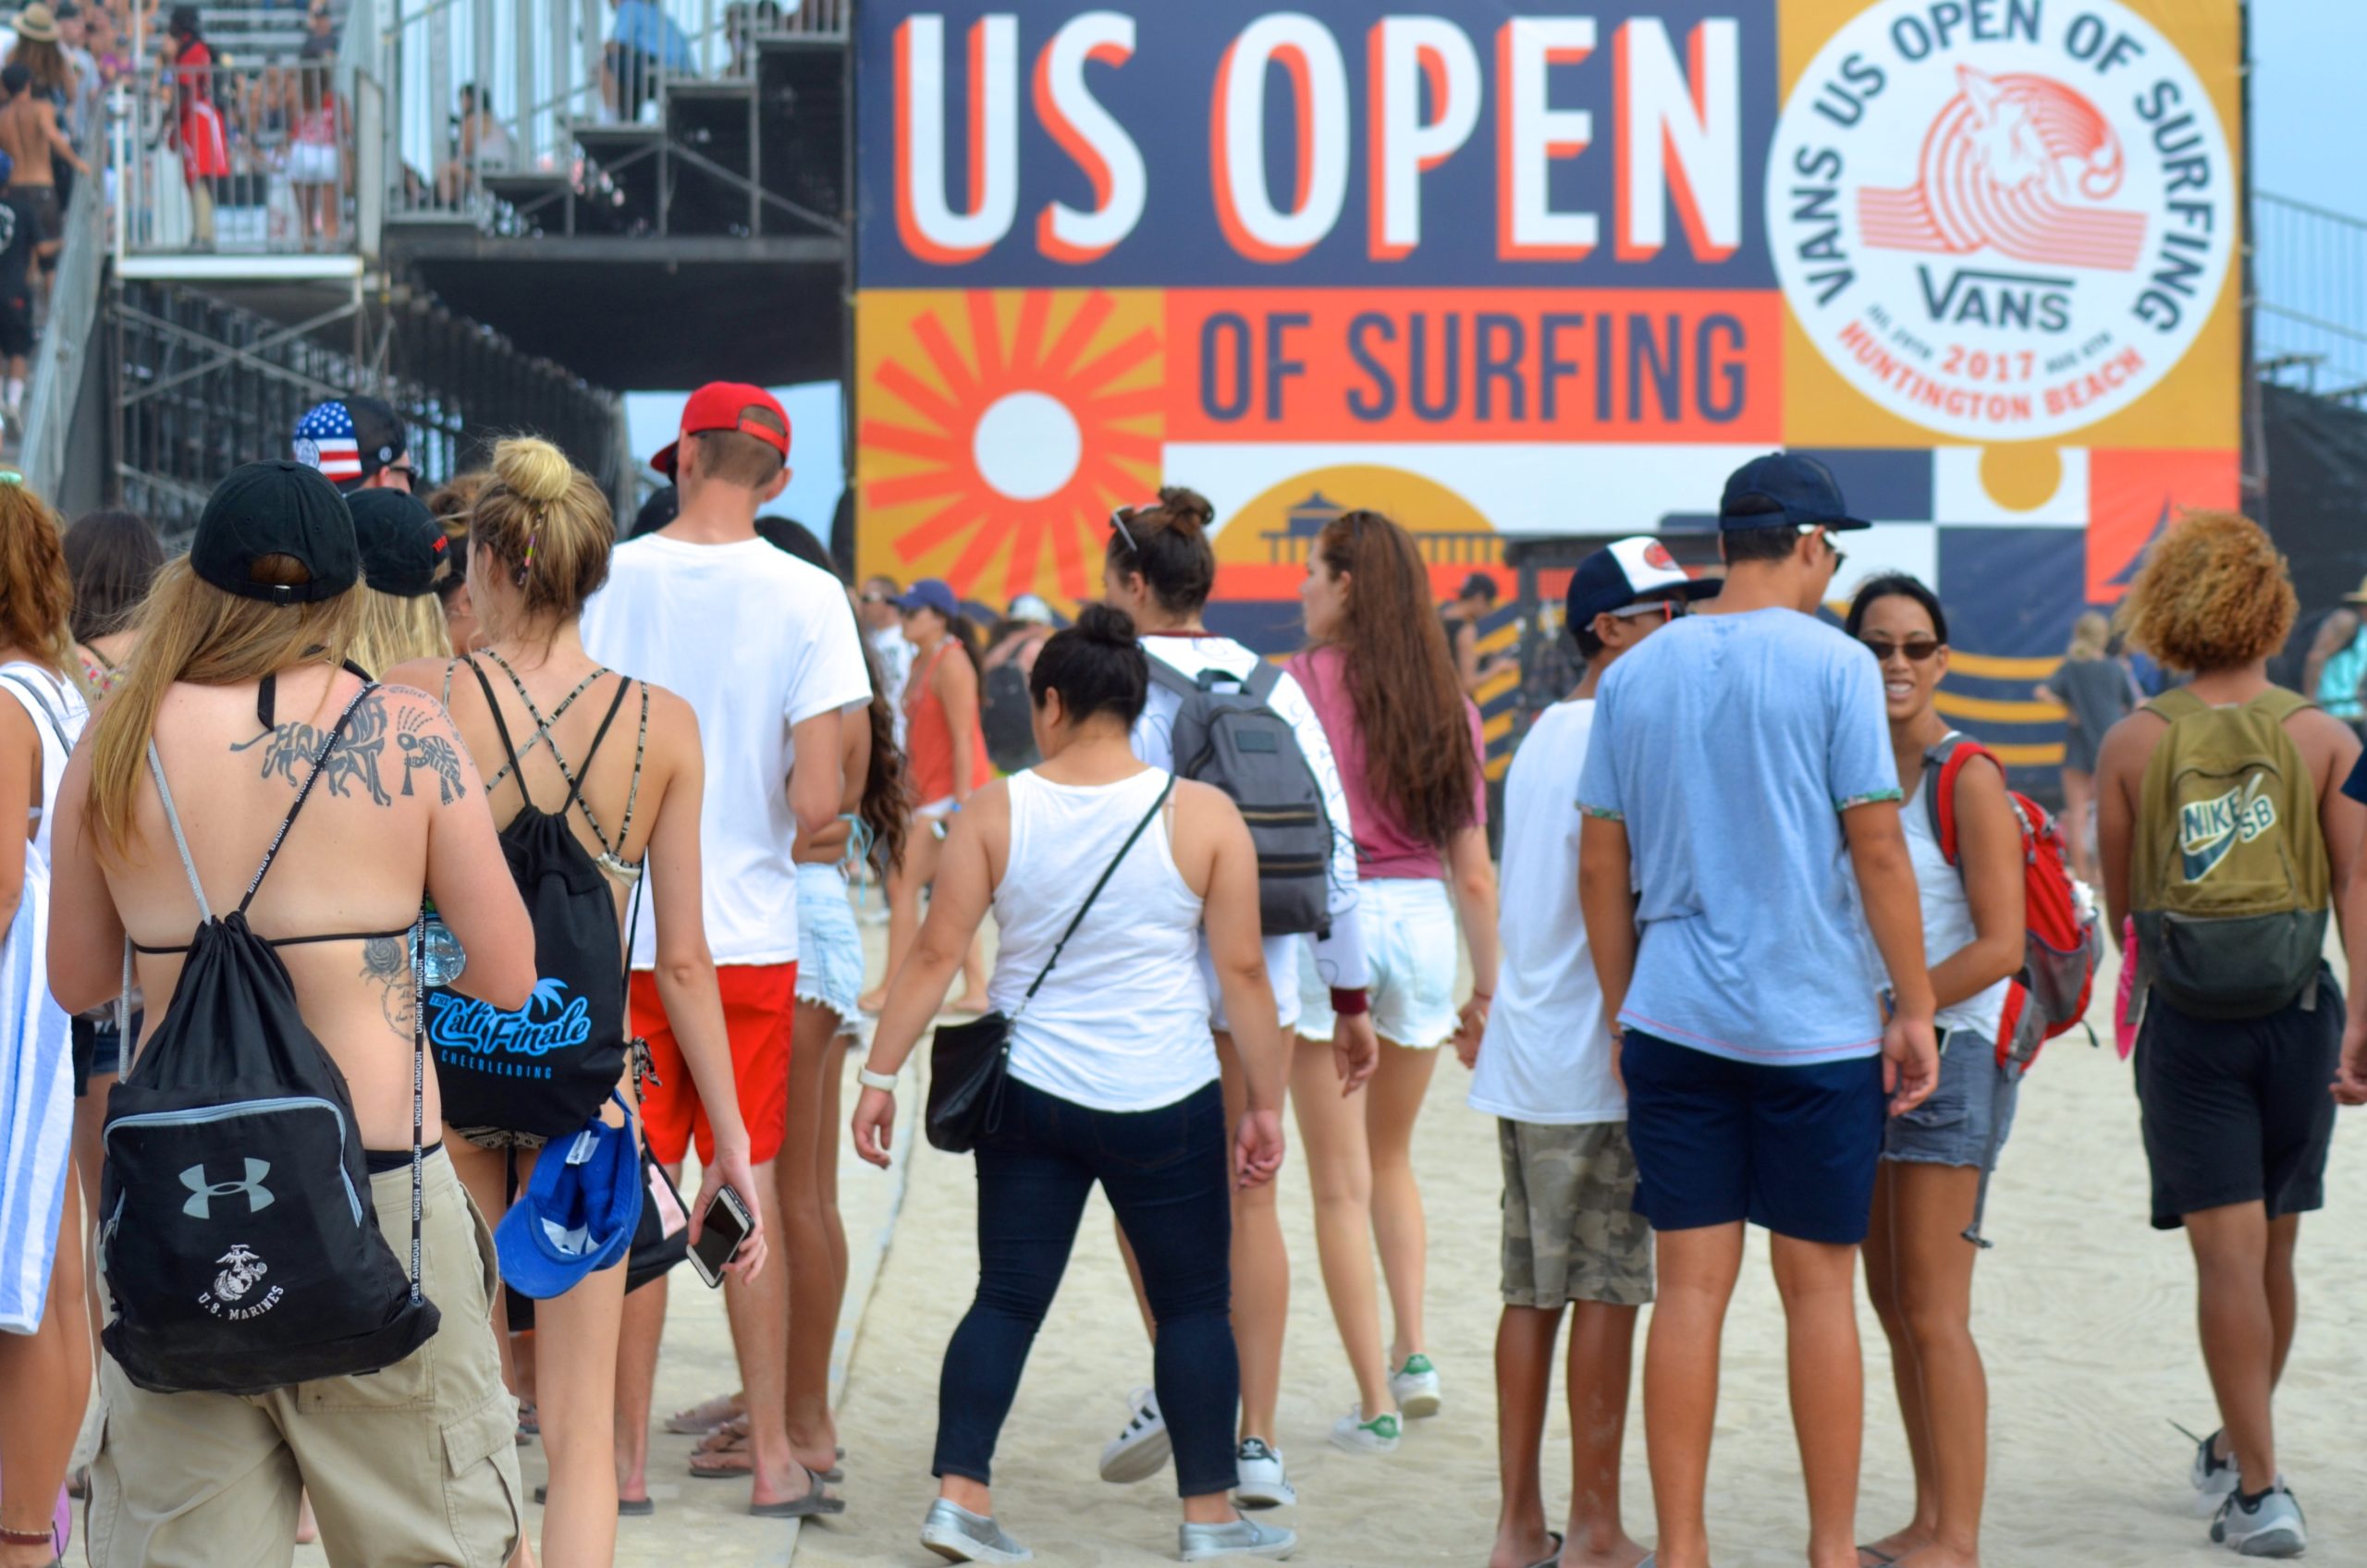 Vans U.S. Open of Surfing: Days 1 and 2 with or without Wind